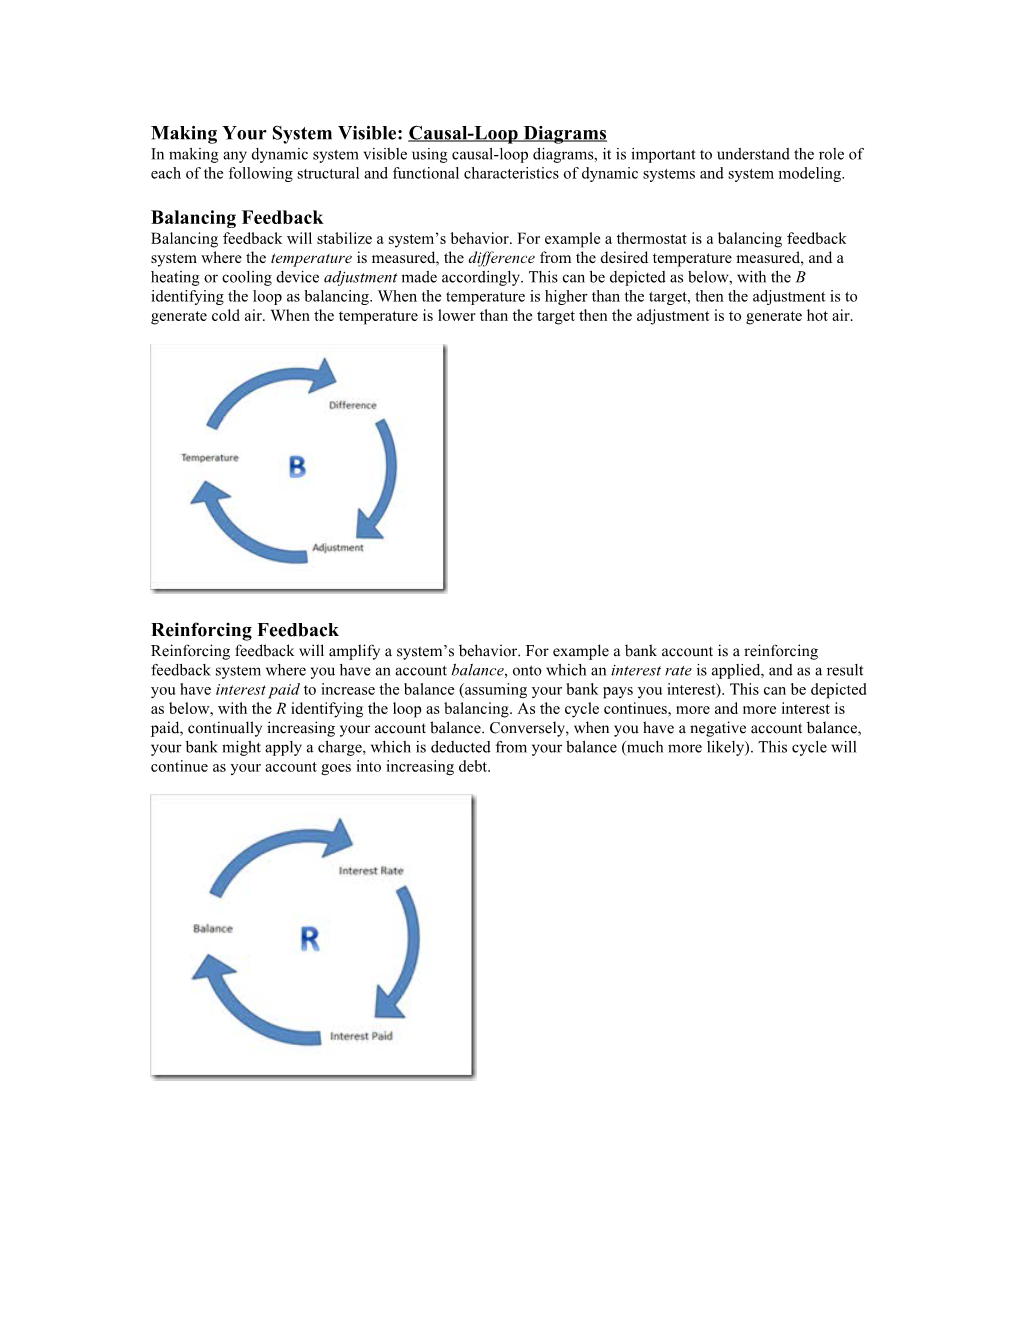 Making Your System Visible: Causal-Loop Diagrams